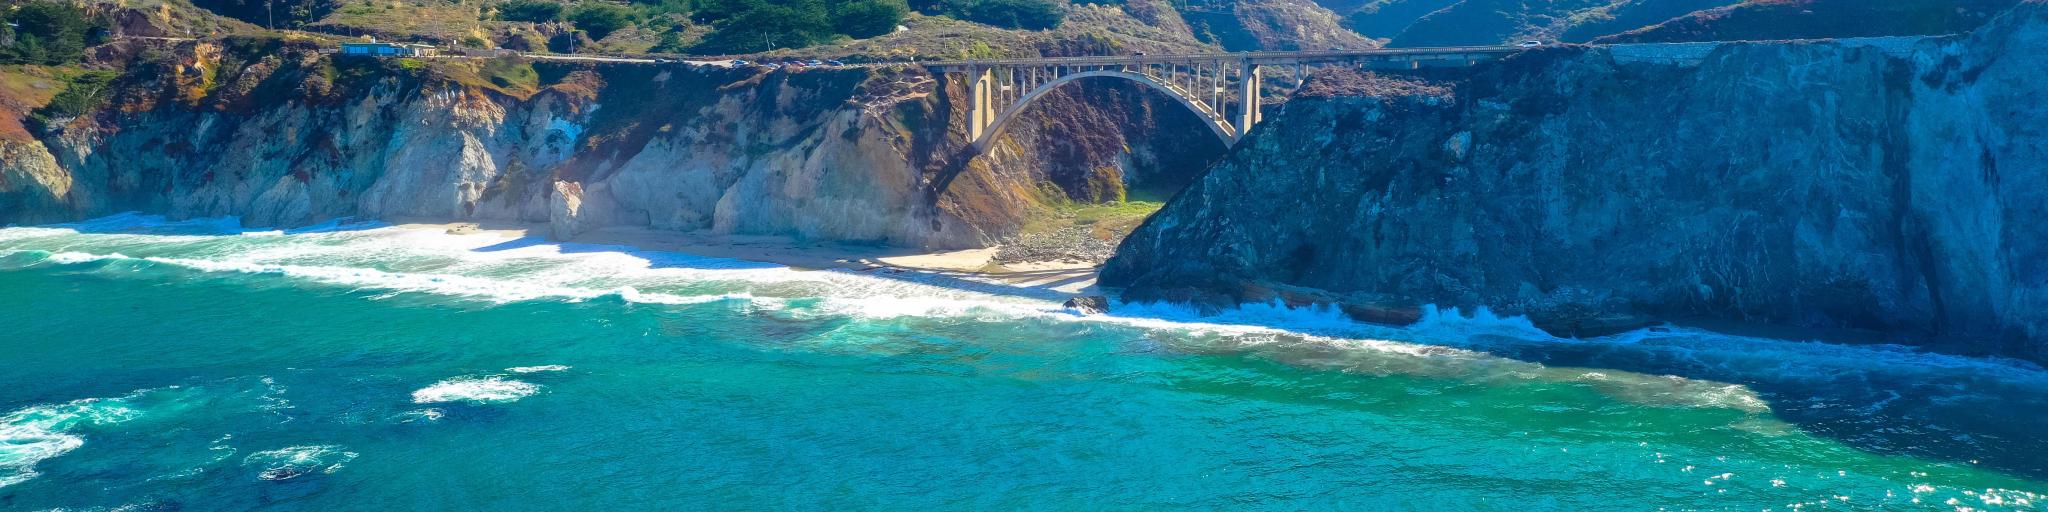 Pacific Coast Highway at Bixby Bridge. Long-range shot with the sea in the foreground